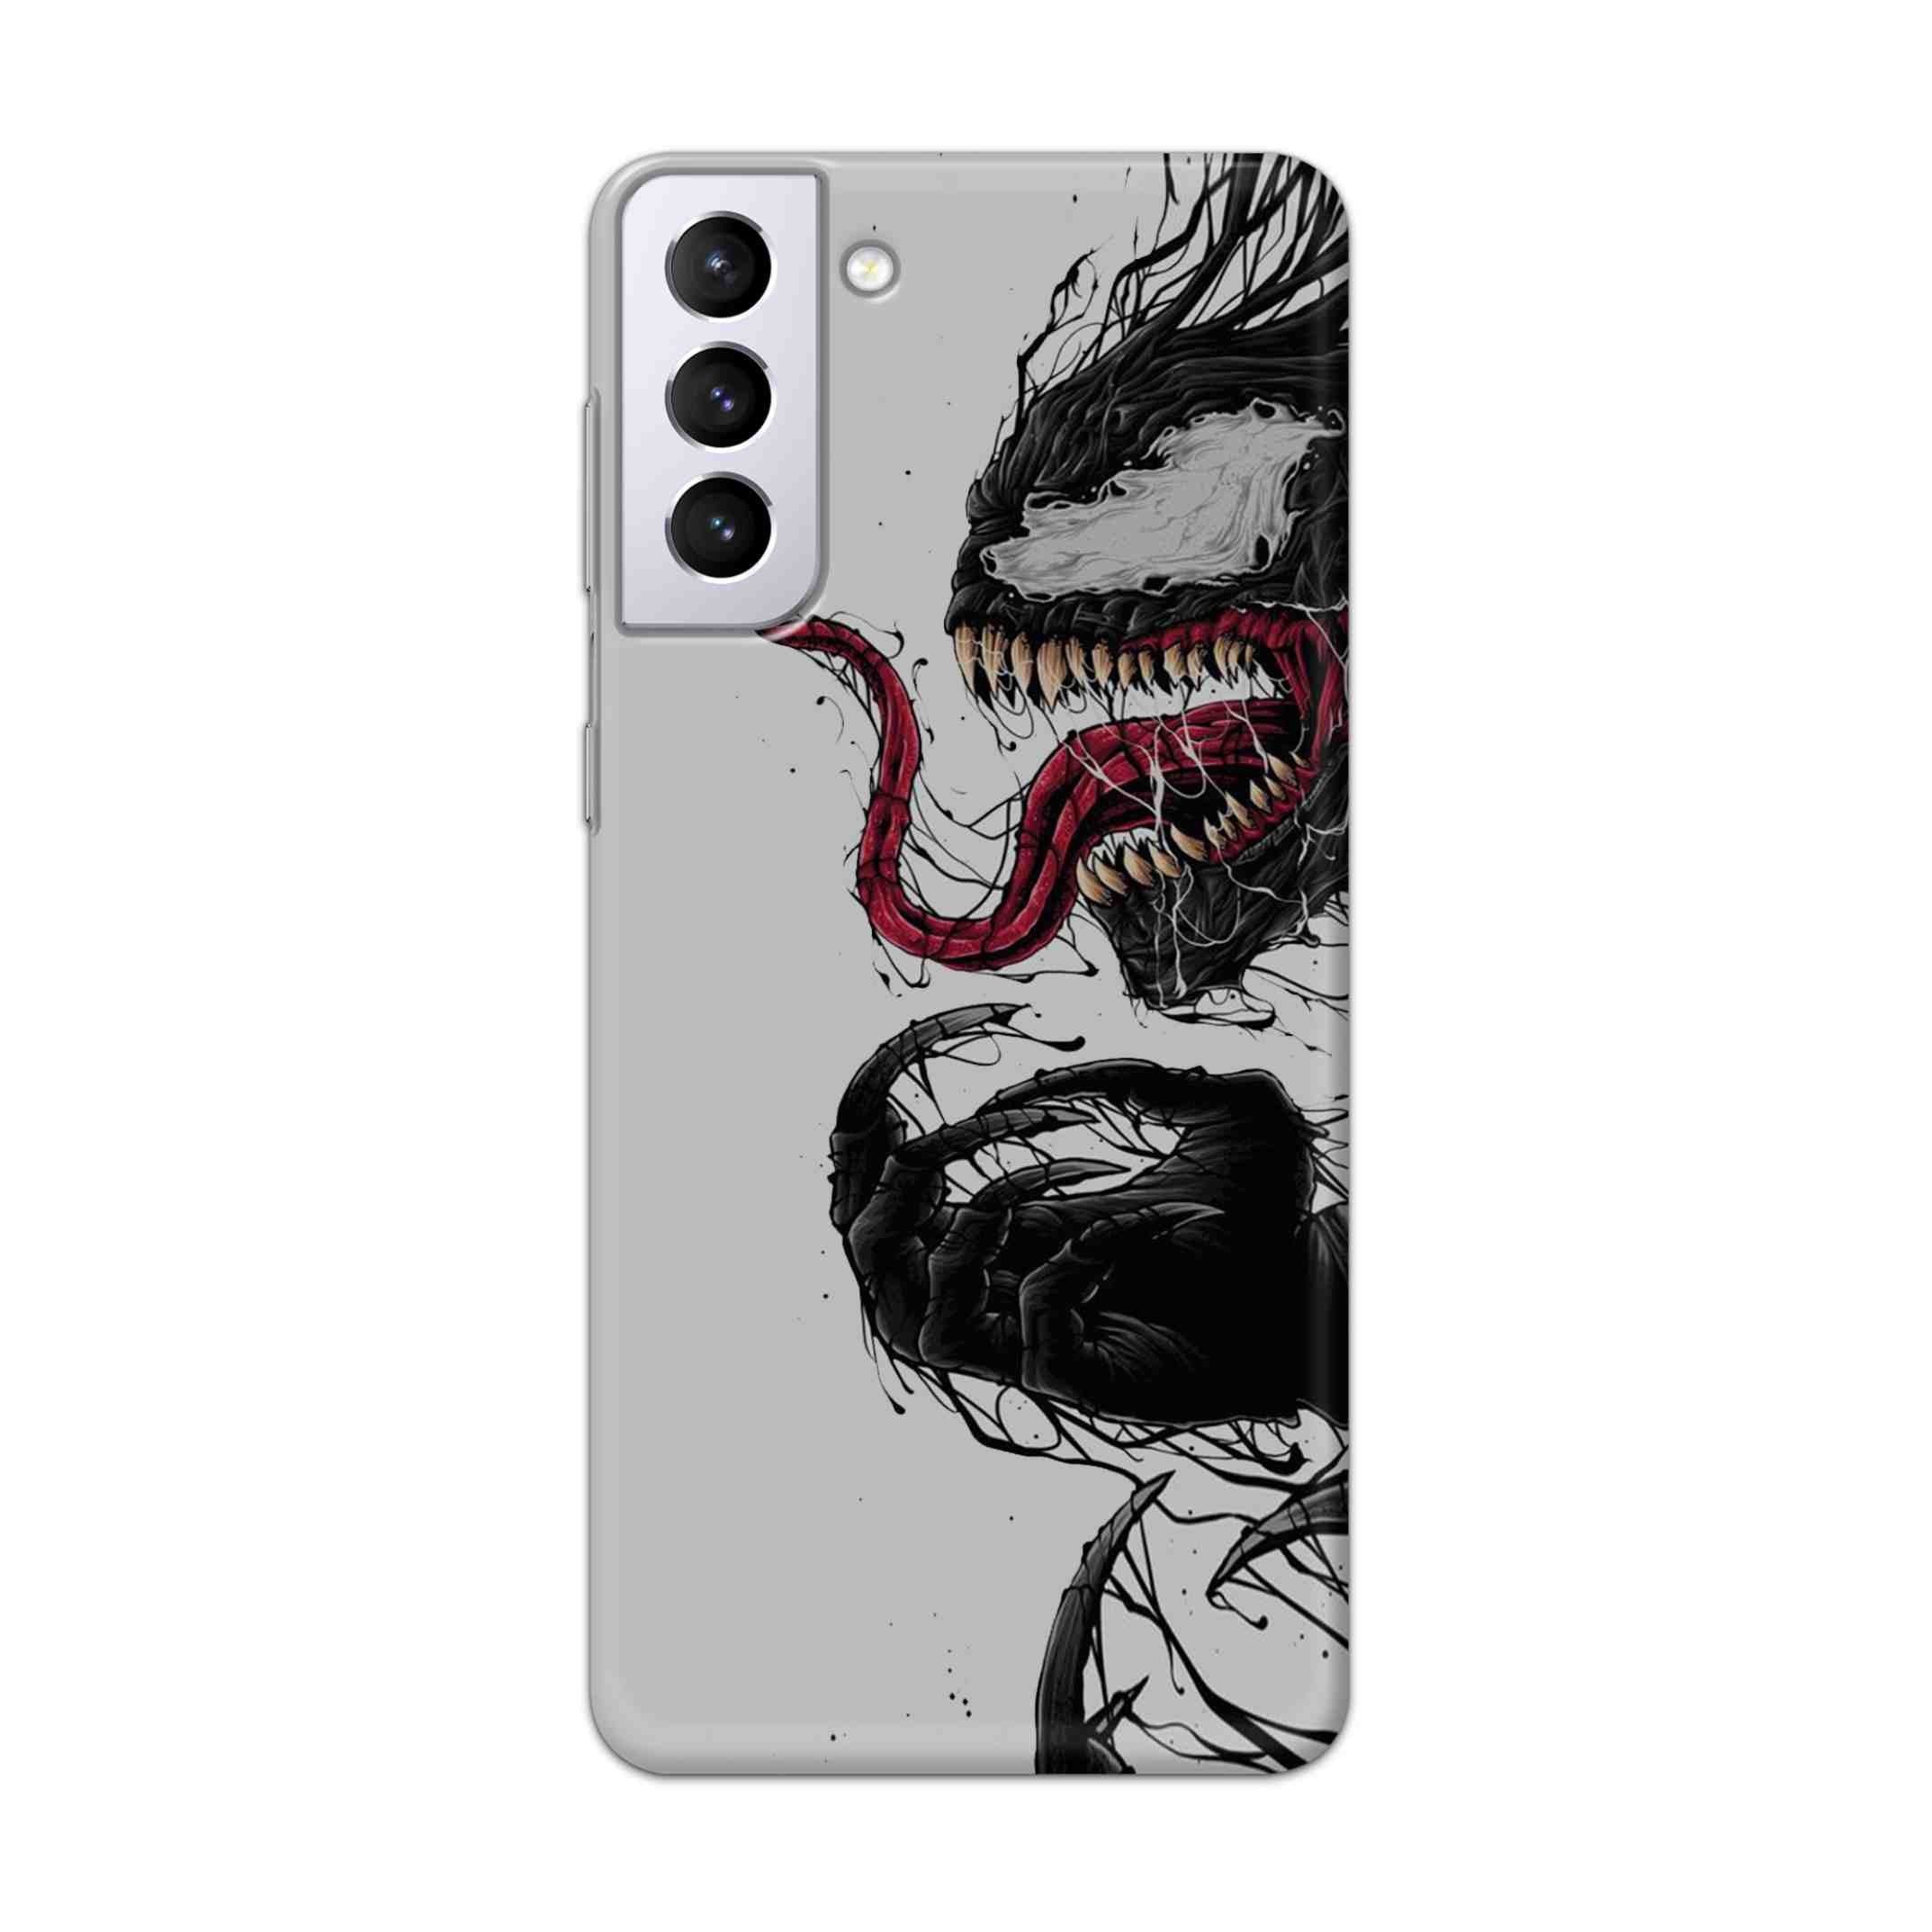 Buy Venom Crazy Hard Back Mobile Phone Case Cover For Samsung Galaxy S21 Online